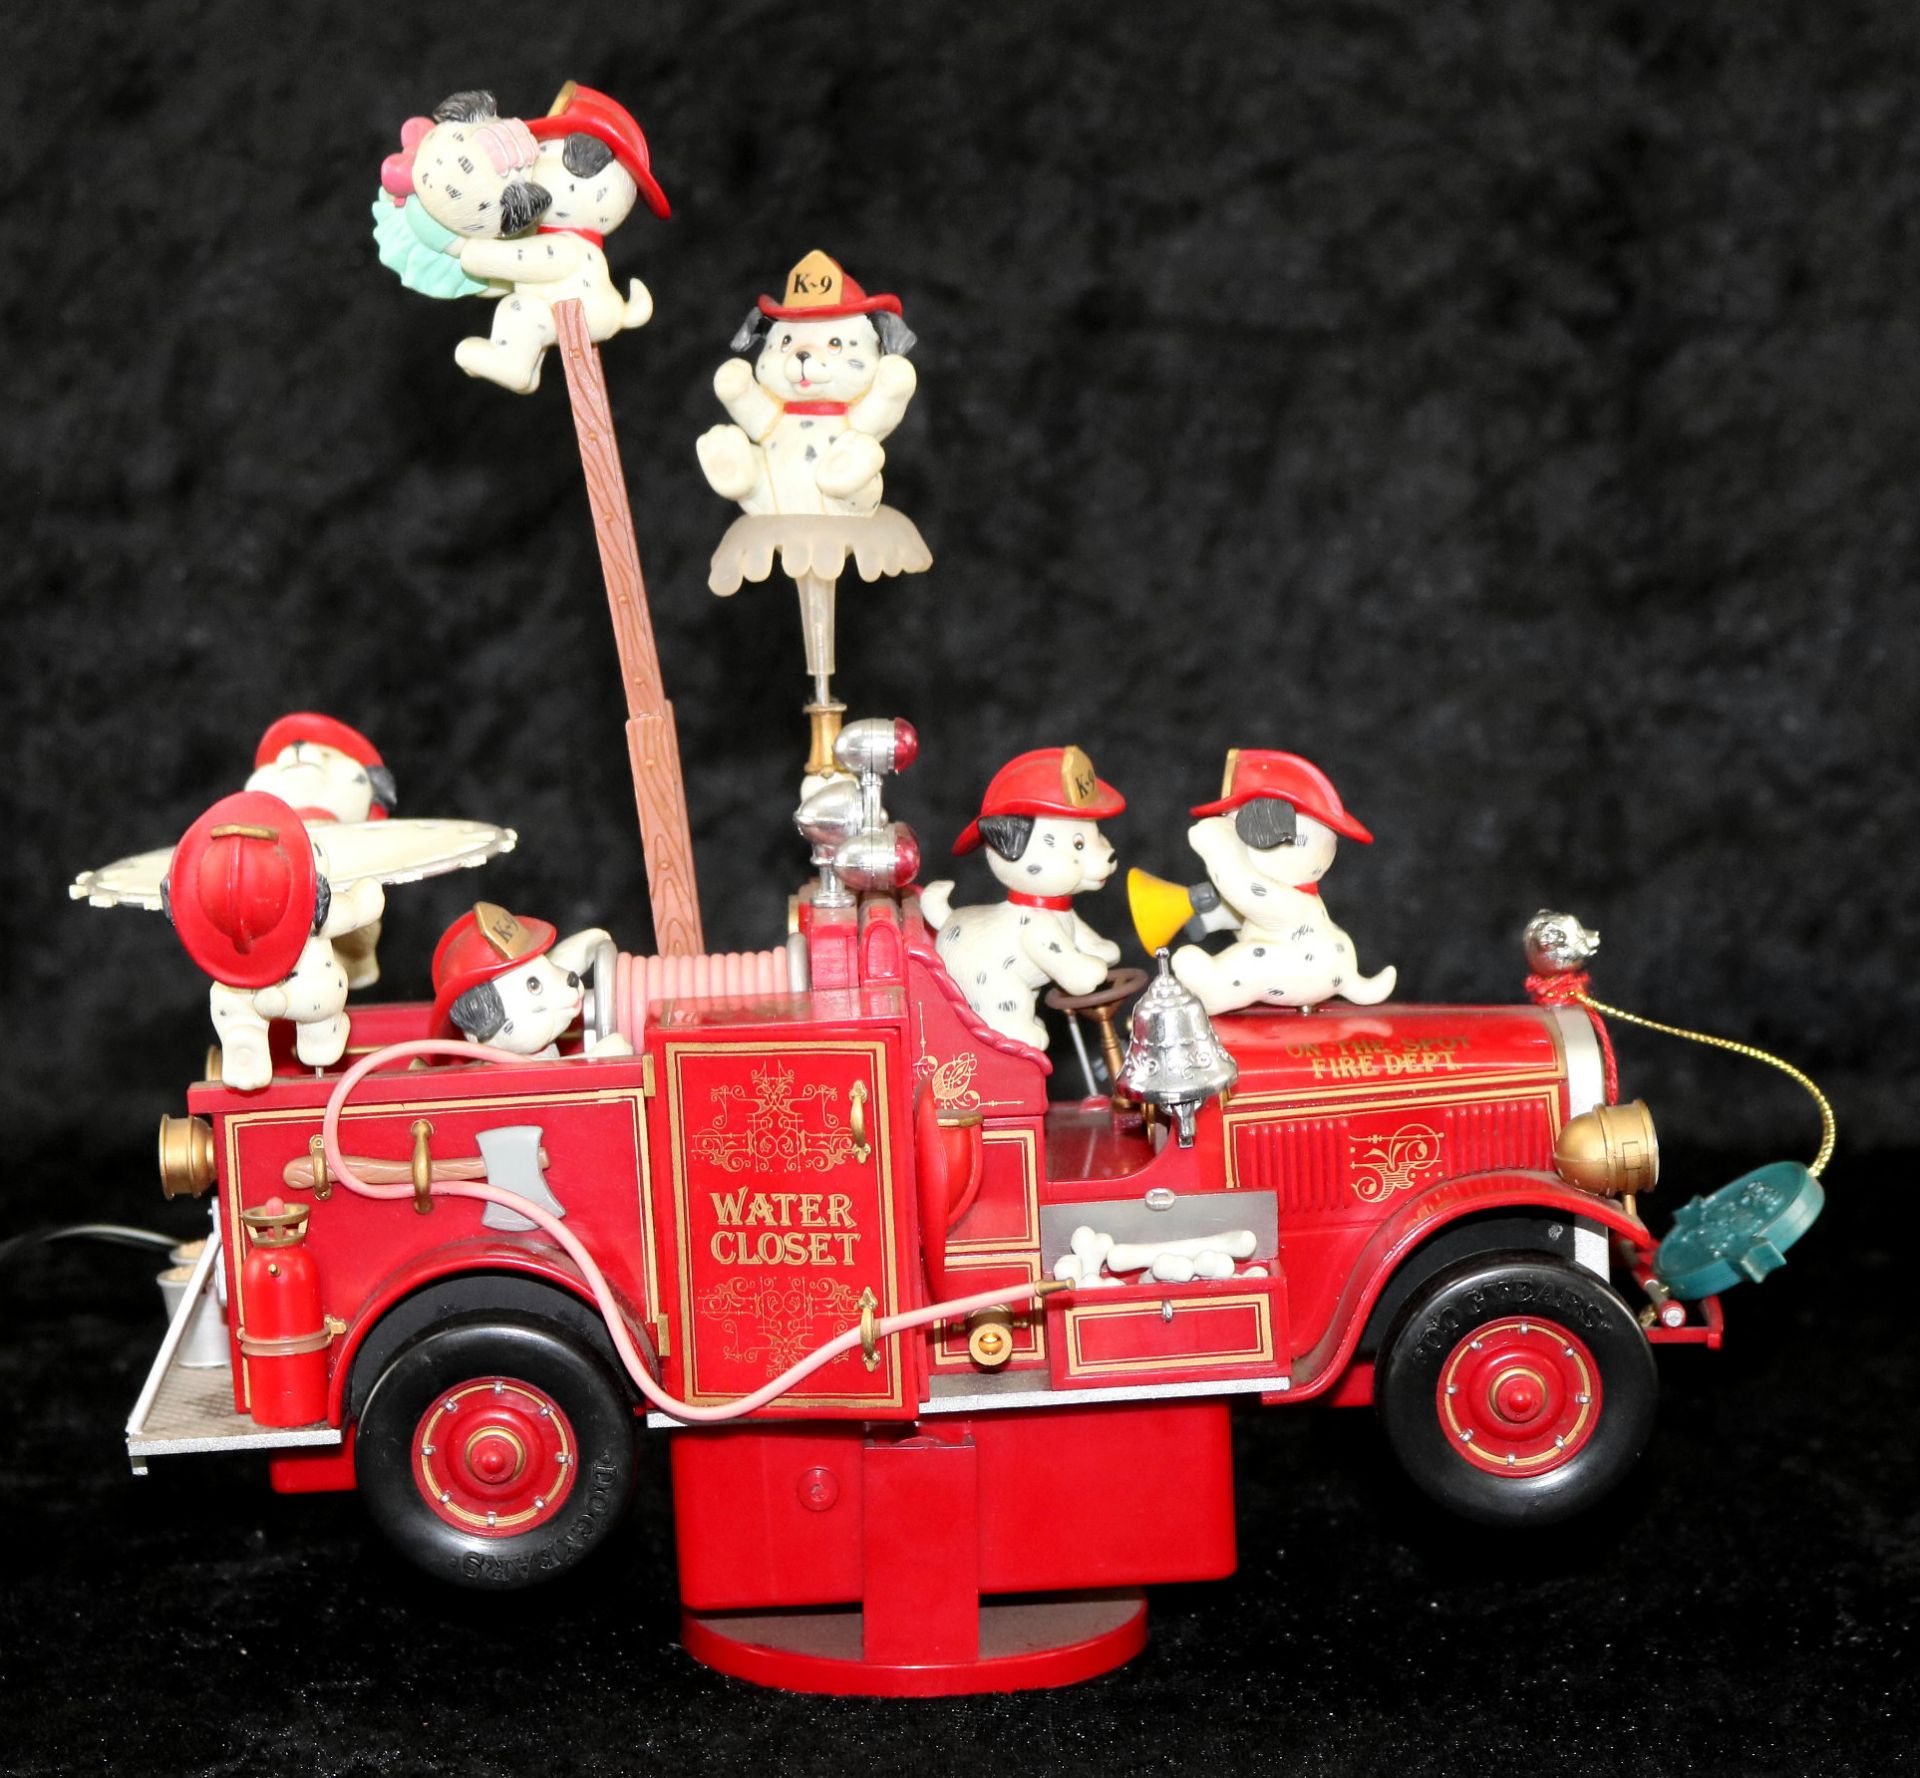 Enesco Spieluhr "On the Spot Fire Department", Melodie "There'll be a hot time in the old town tonig